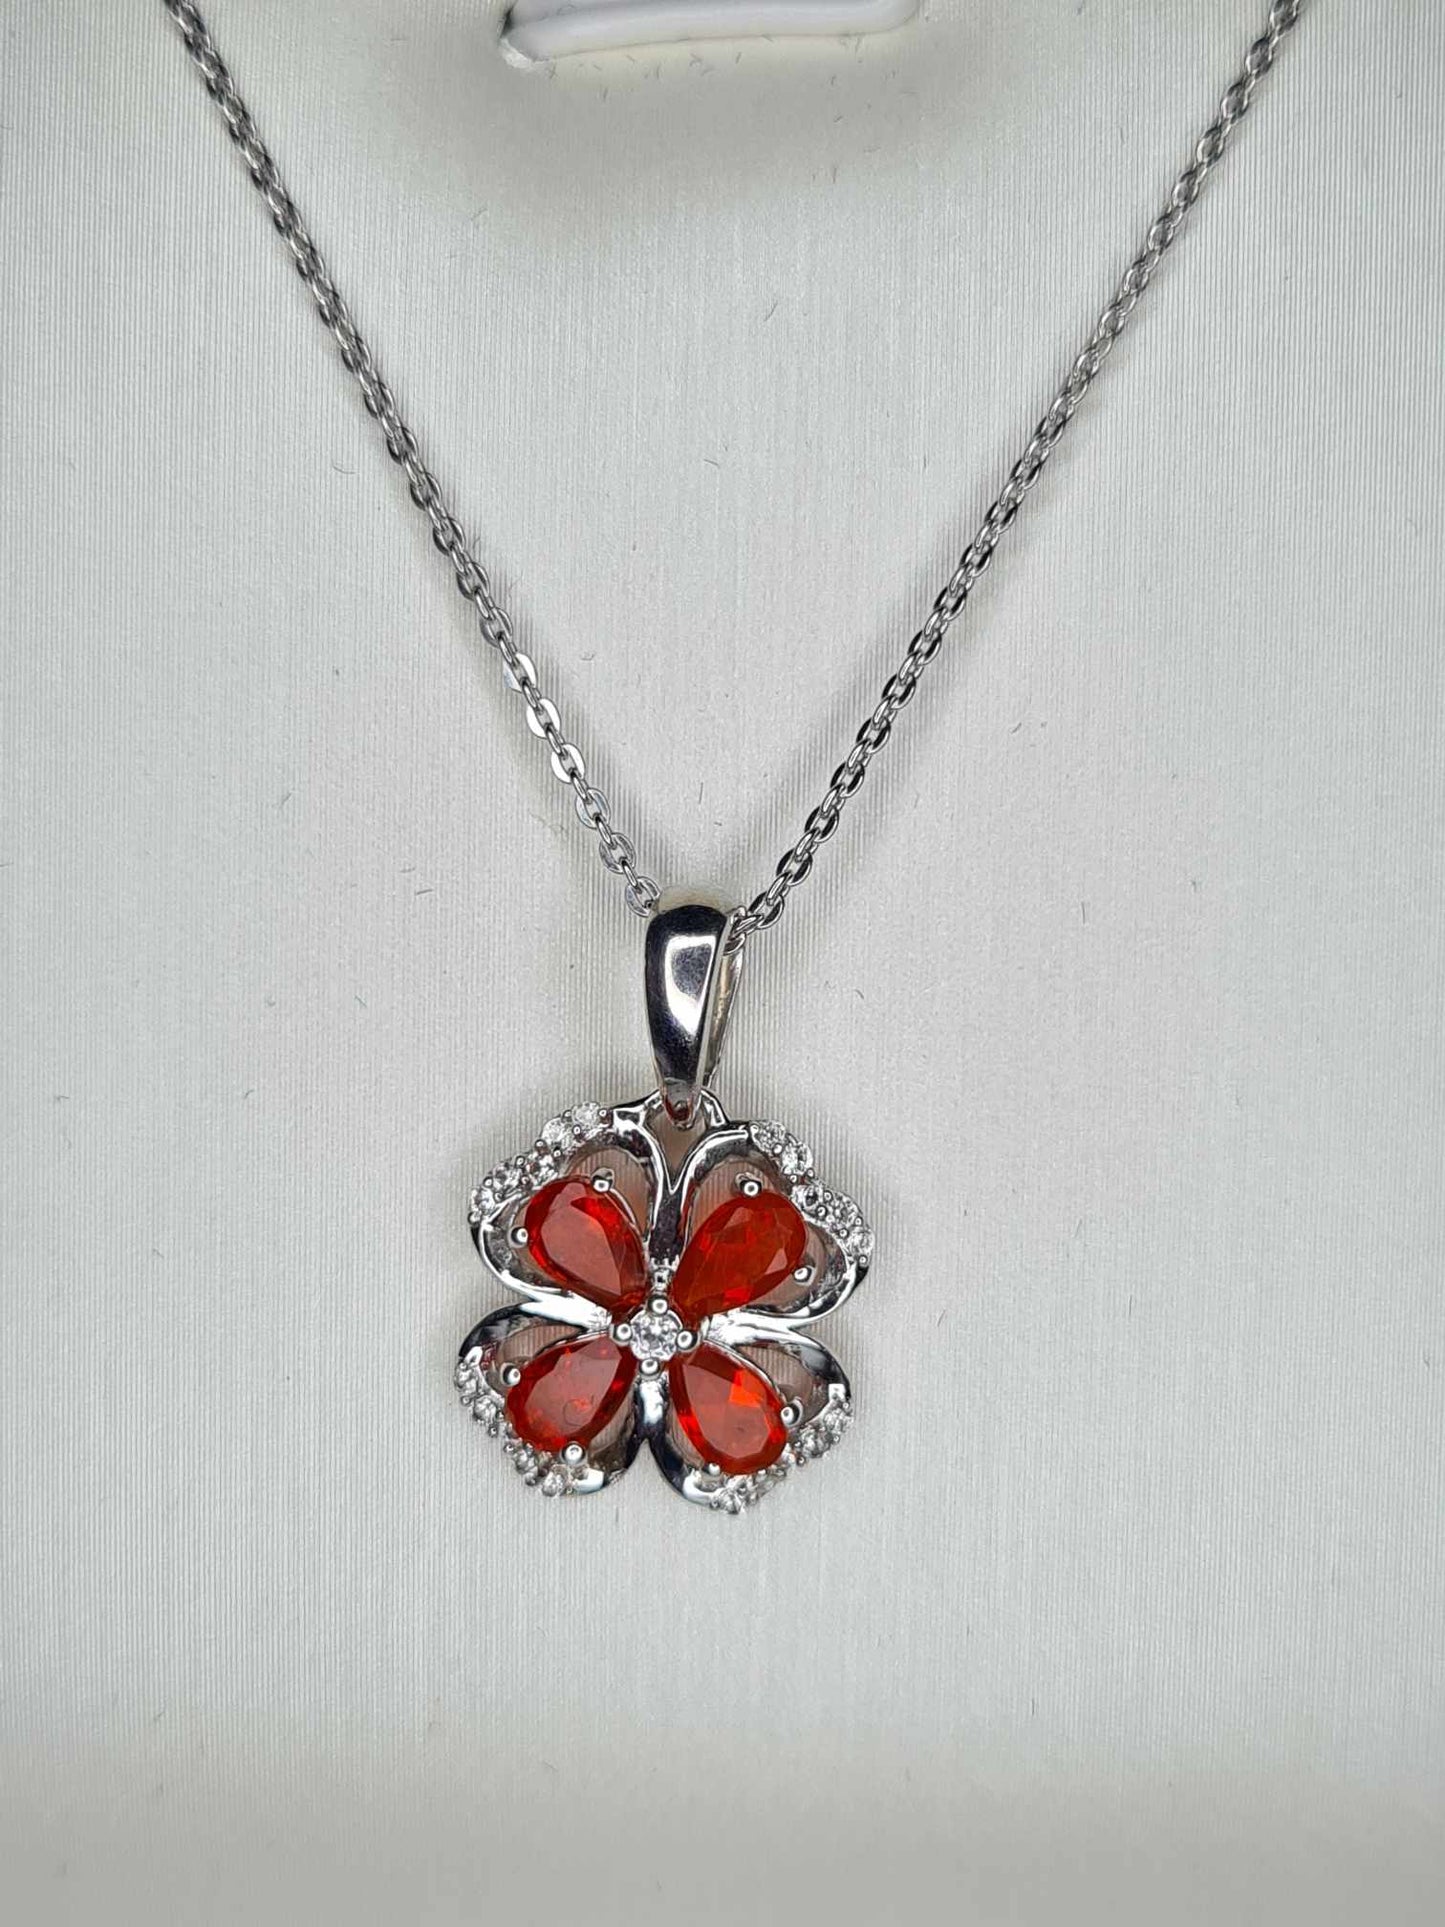 0.790ct. Fire Opal &amp; Natural Zircon Clover Necklace in Platinum Overlay 925 Sterling Silver